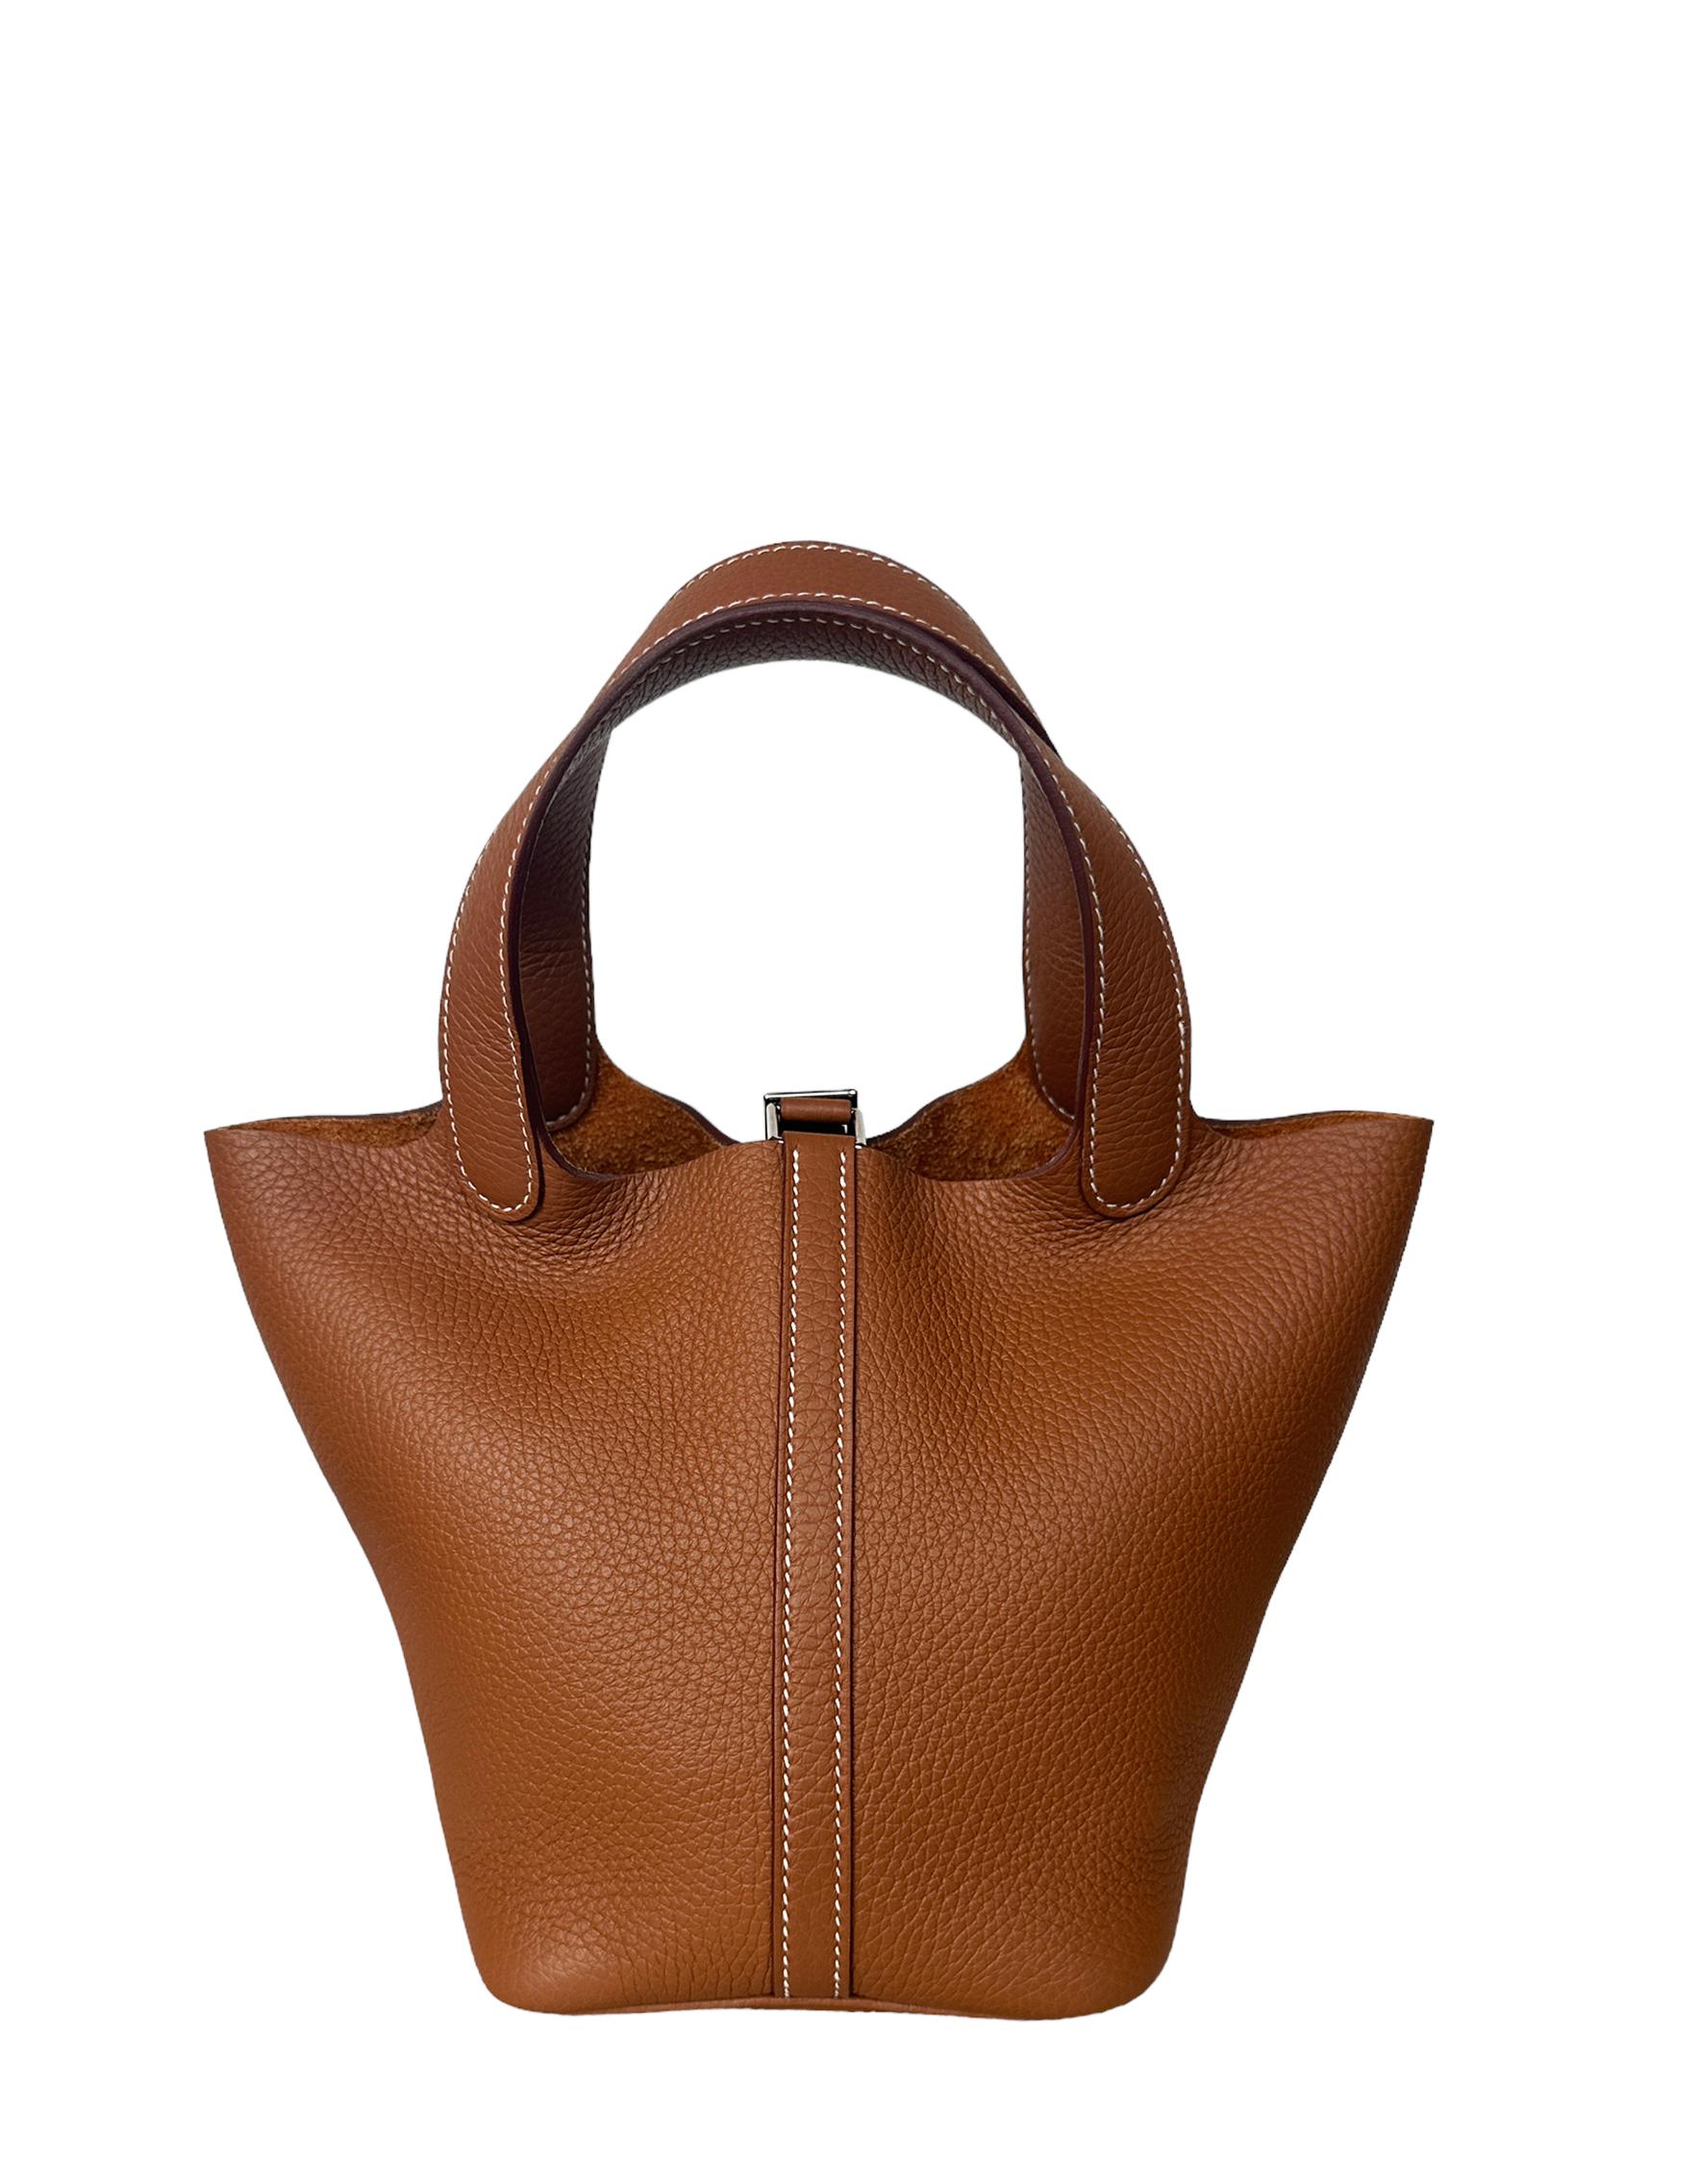 Hermes Gold Tan Taurillon Clemence Leather Picotin Lock 18 PM Bag

Made In: France
Year of Production: 2022
Color: Tan 